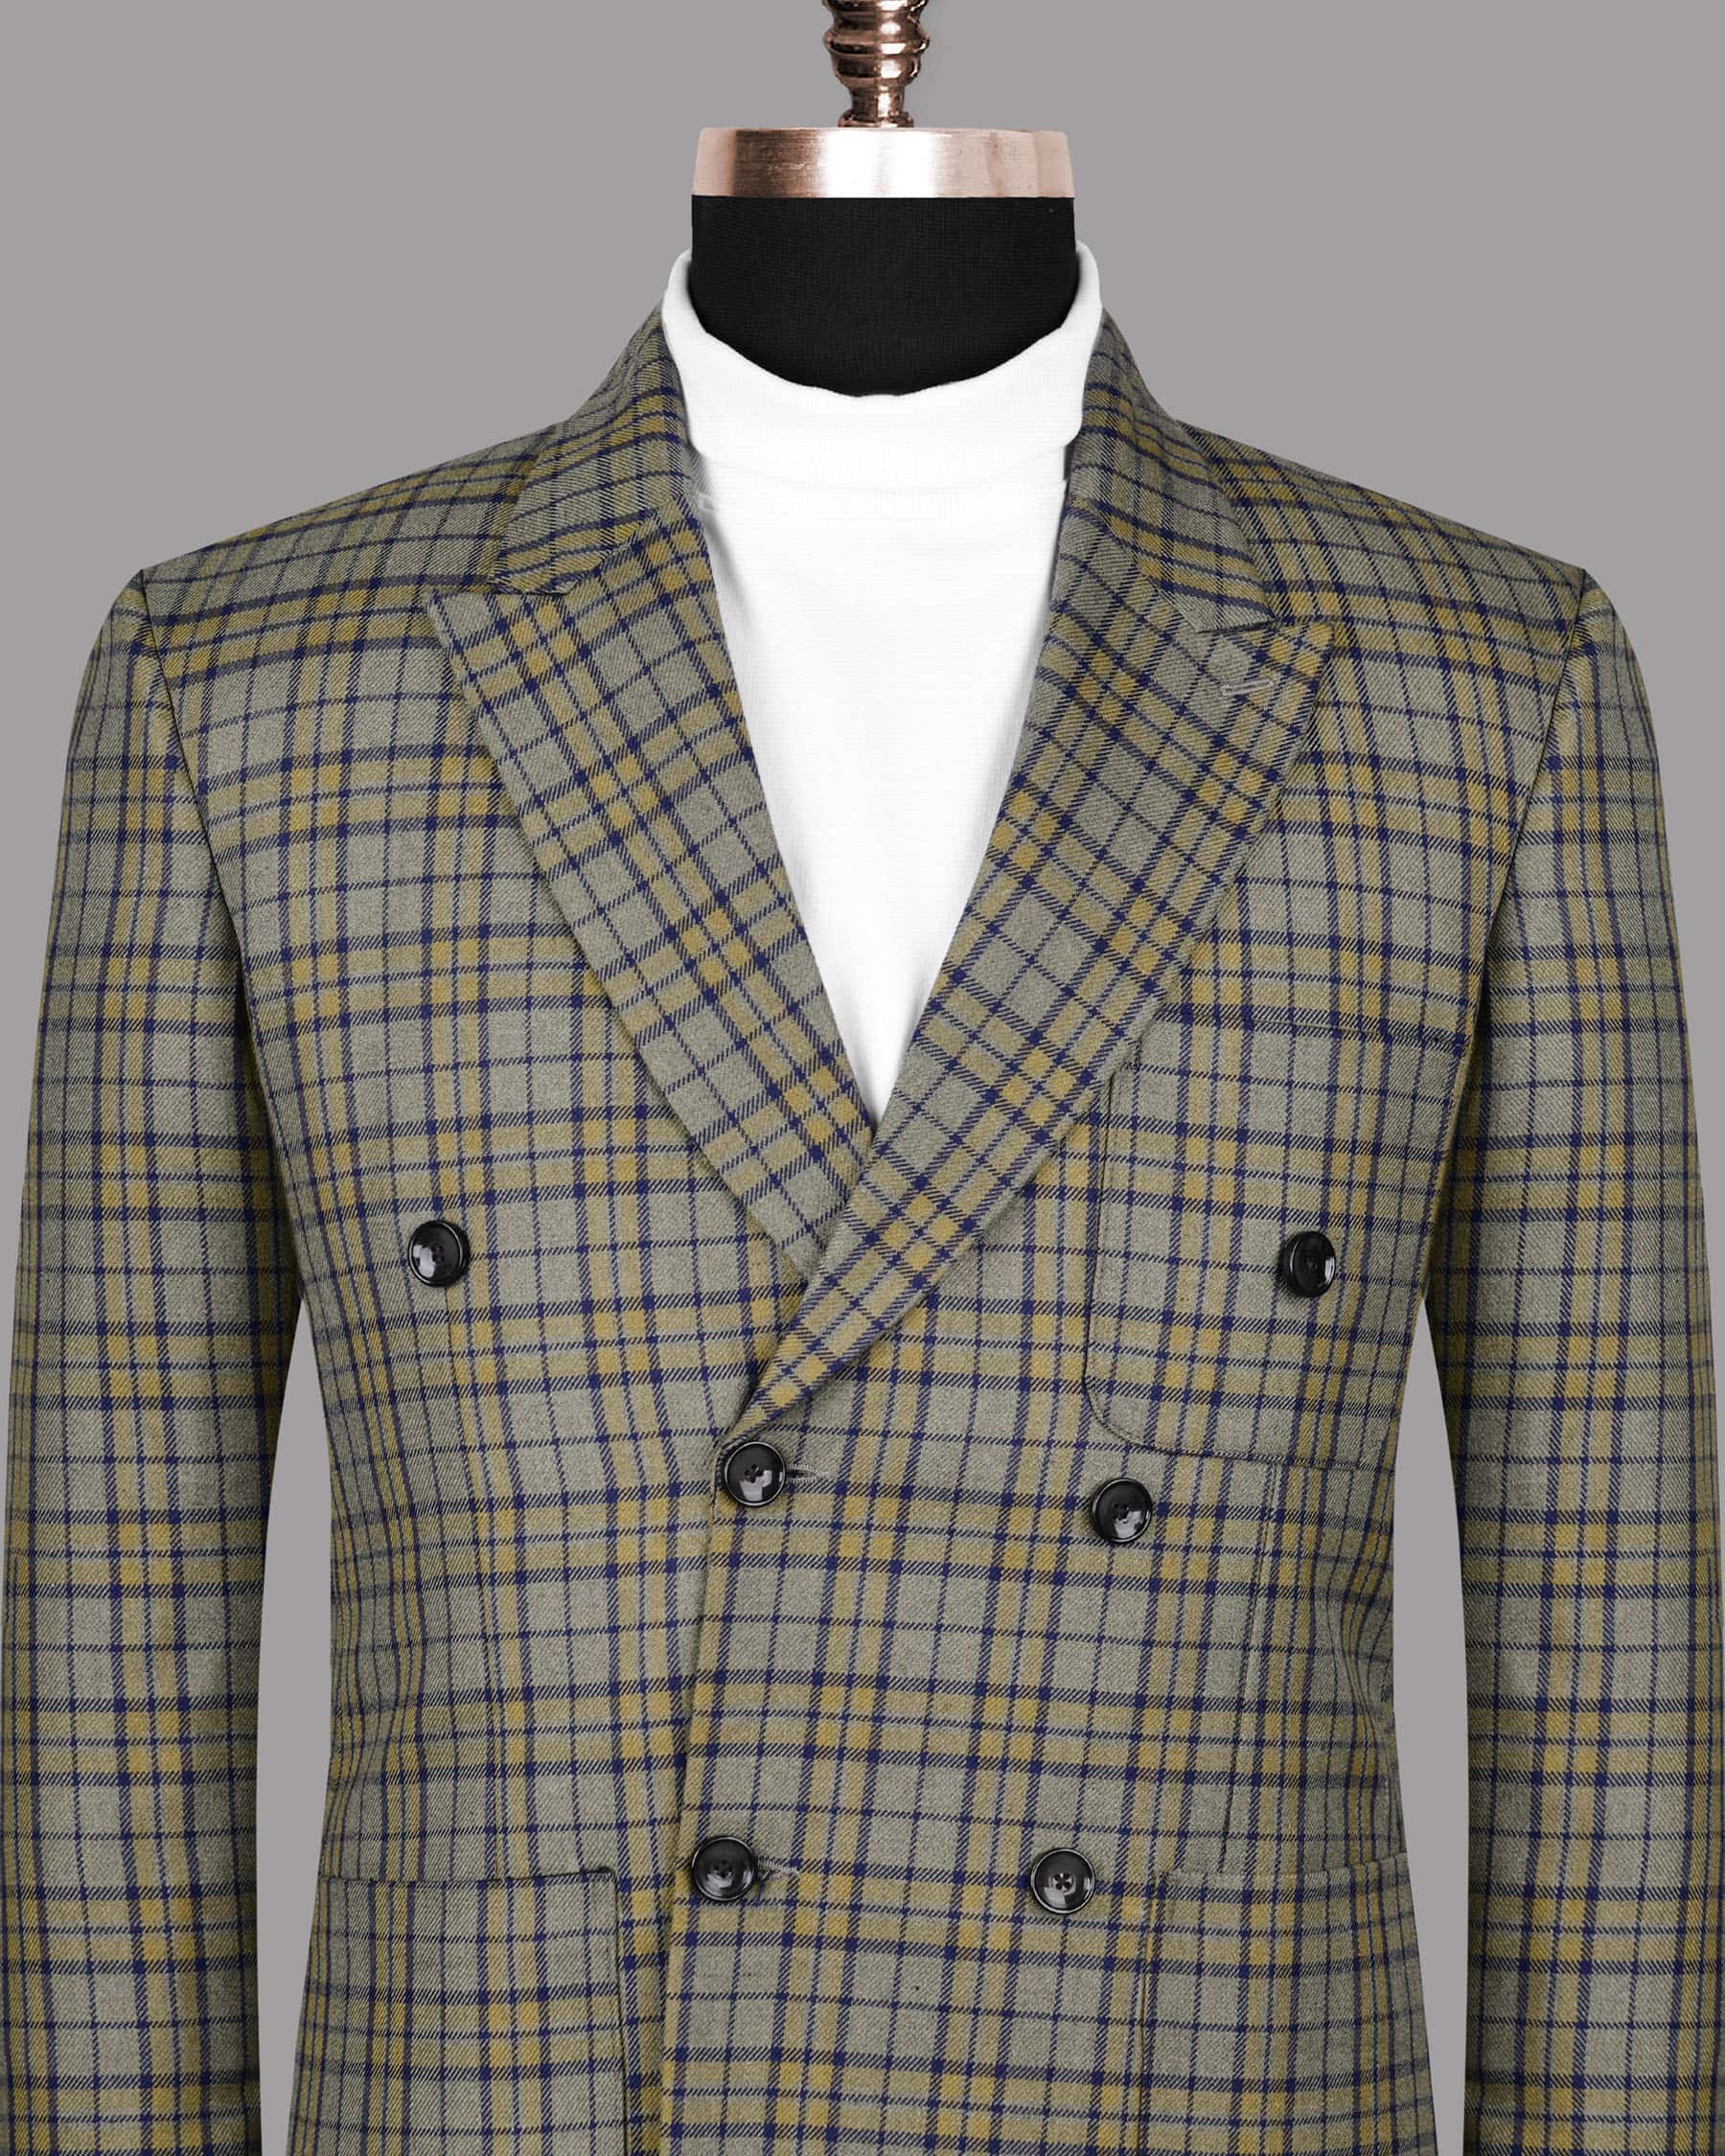 Arrowtown Checked Double Breasted Blazer BL1088-DB-PP-36, BL1088-DB-PP-40, BL1088-DB-PP-42, BL1088-DB-PP-46, BL1088-DB-PP-48, BL1088-DB-PP-50, BL1088-DB-PP-54, BL1088-DB-PP-60, BL1088-DB-PP-56, BL1088-DB-PP-58, BL1088-DB-PP-38, BL1088-DB-PP-44, BL1088-DB-PP-52